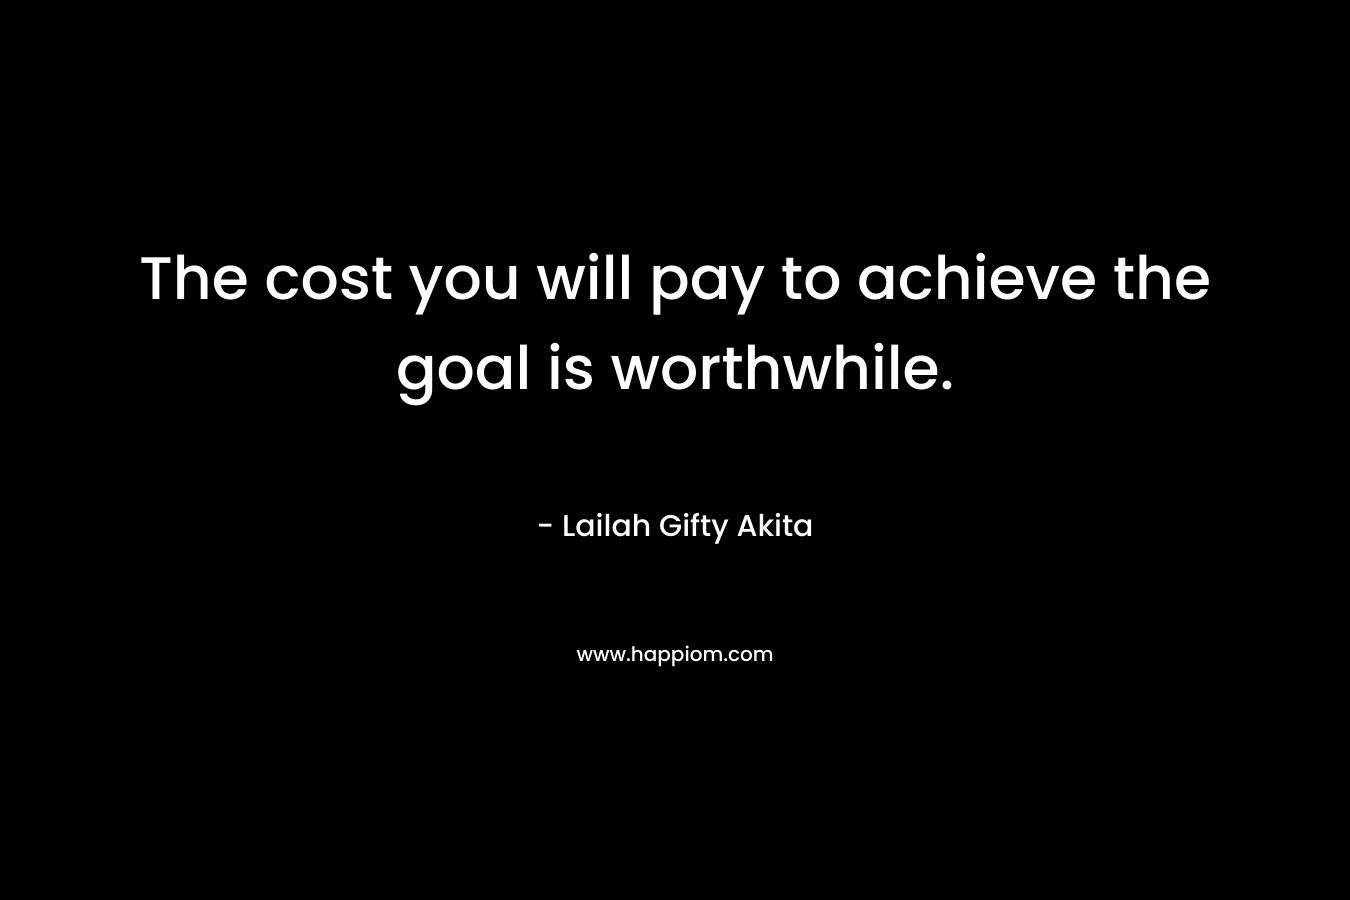 The cost you will pay to achieve the goal is worthwhile.